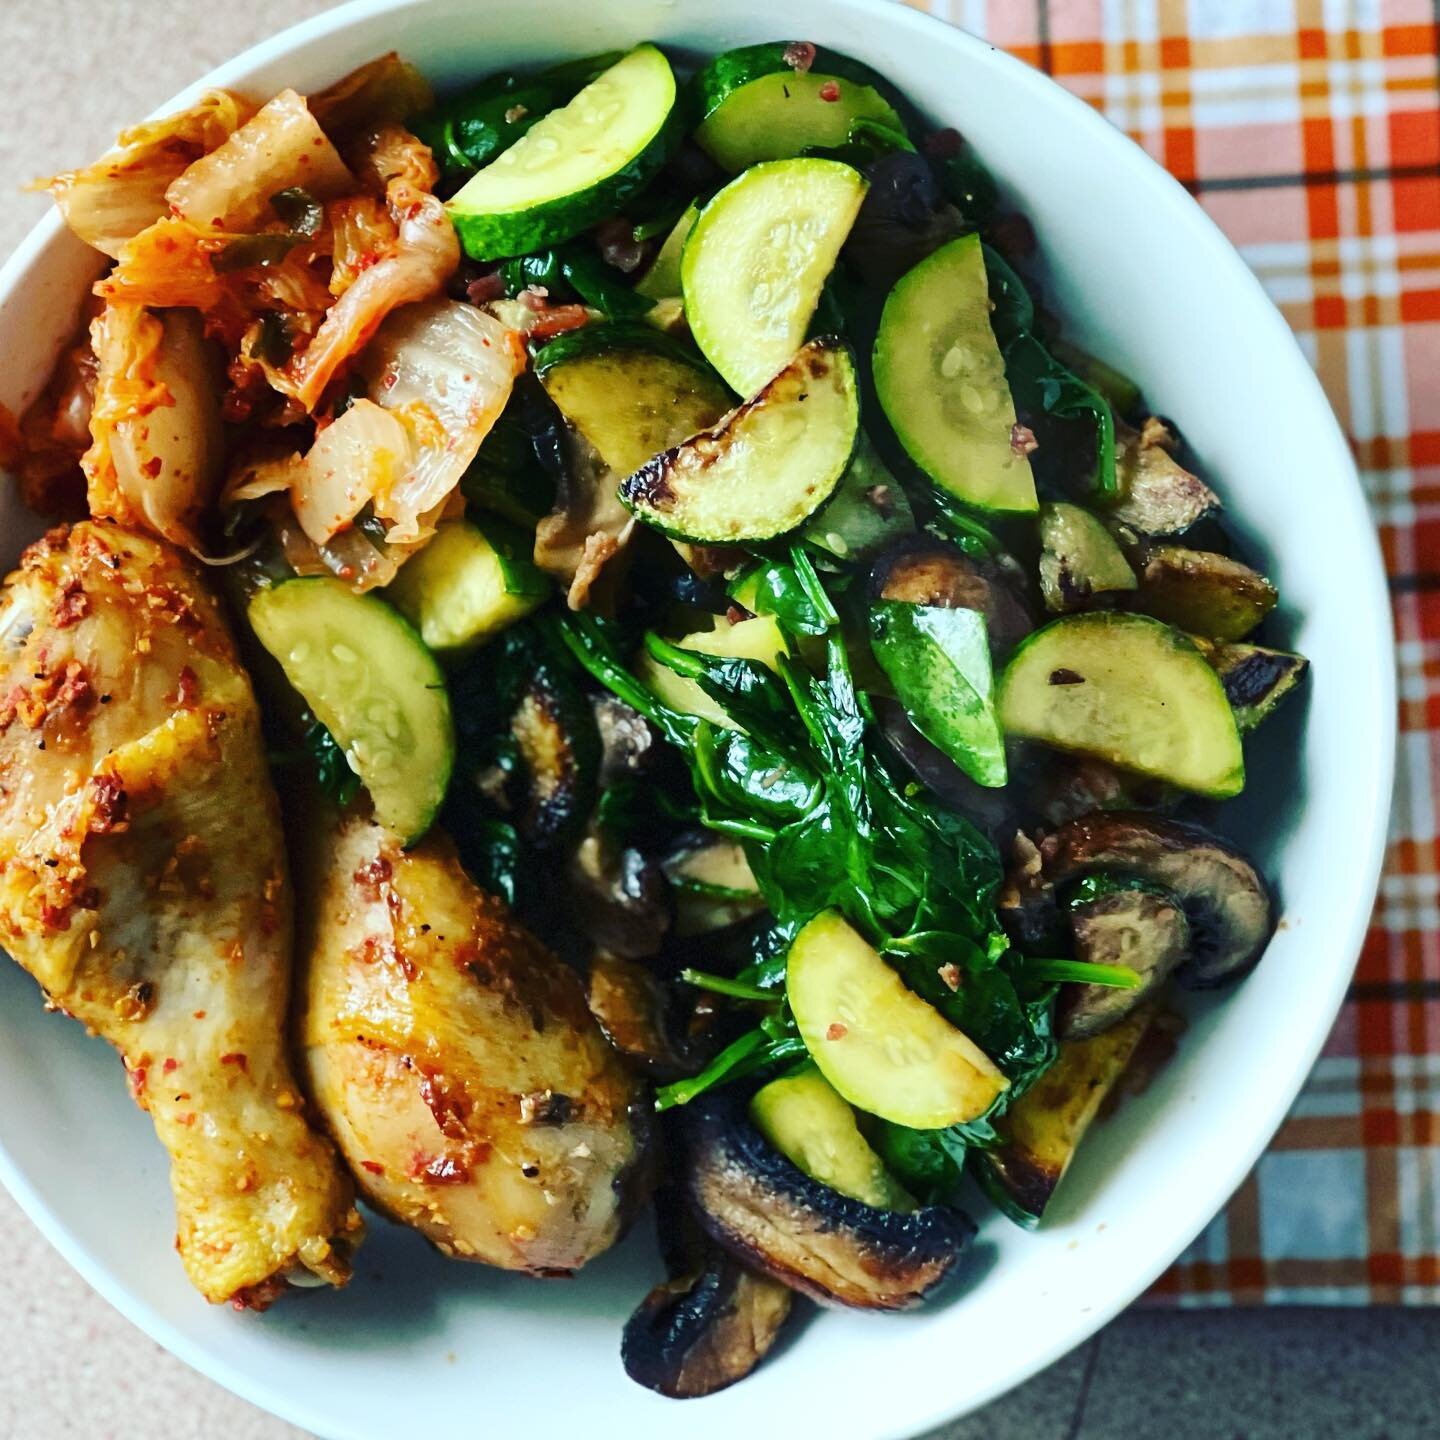 Lunch in under 10 minutes. (I cheated, I meal prepped a whole sheet pan of chicken legs so I had a quick protein option!) I have 2 goals: eat more veggies and Make actual lunches for myself. This fit the bill! Quick chop on a zuke, some mushrooms and